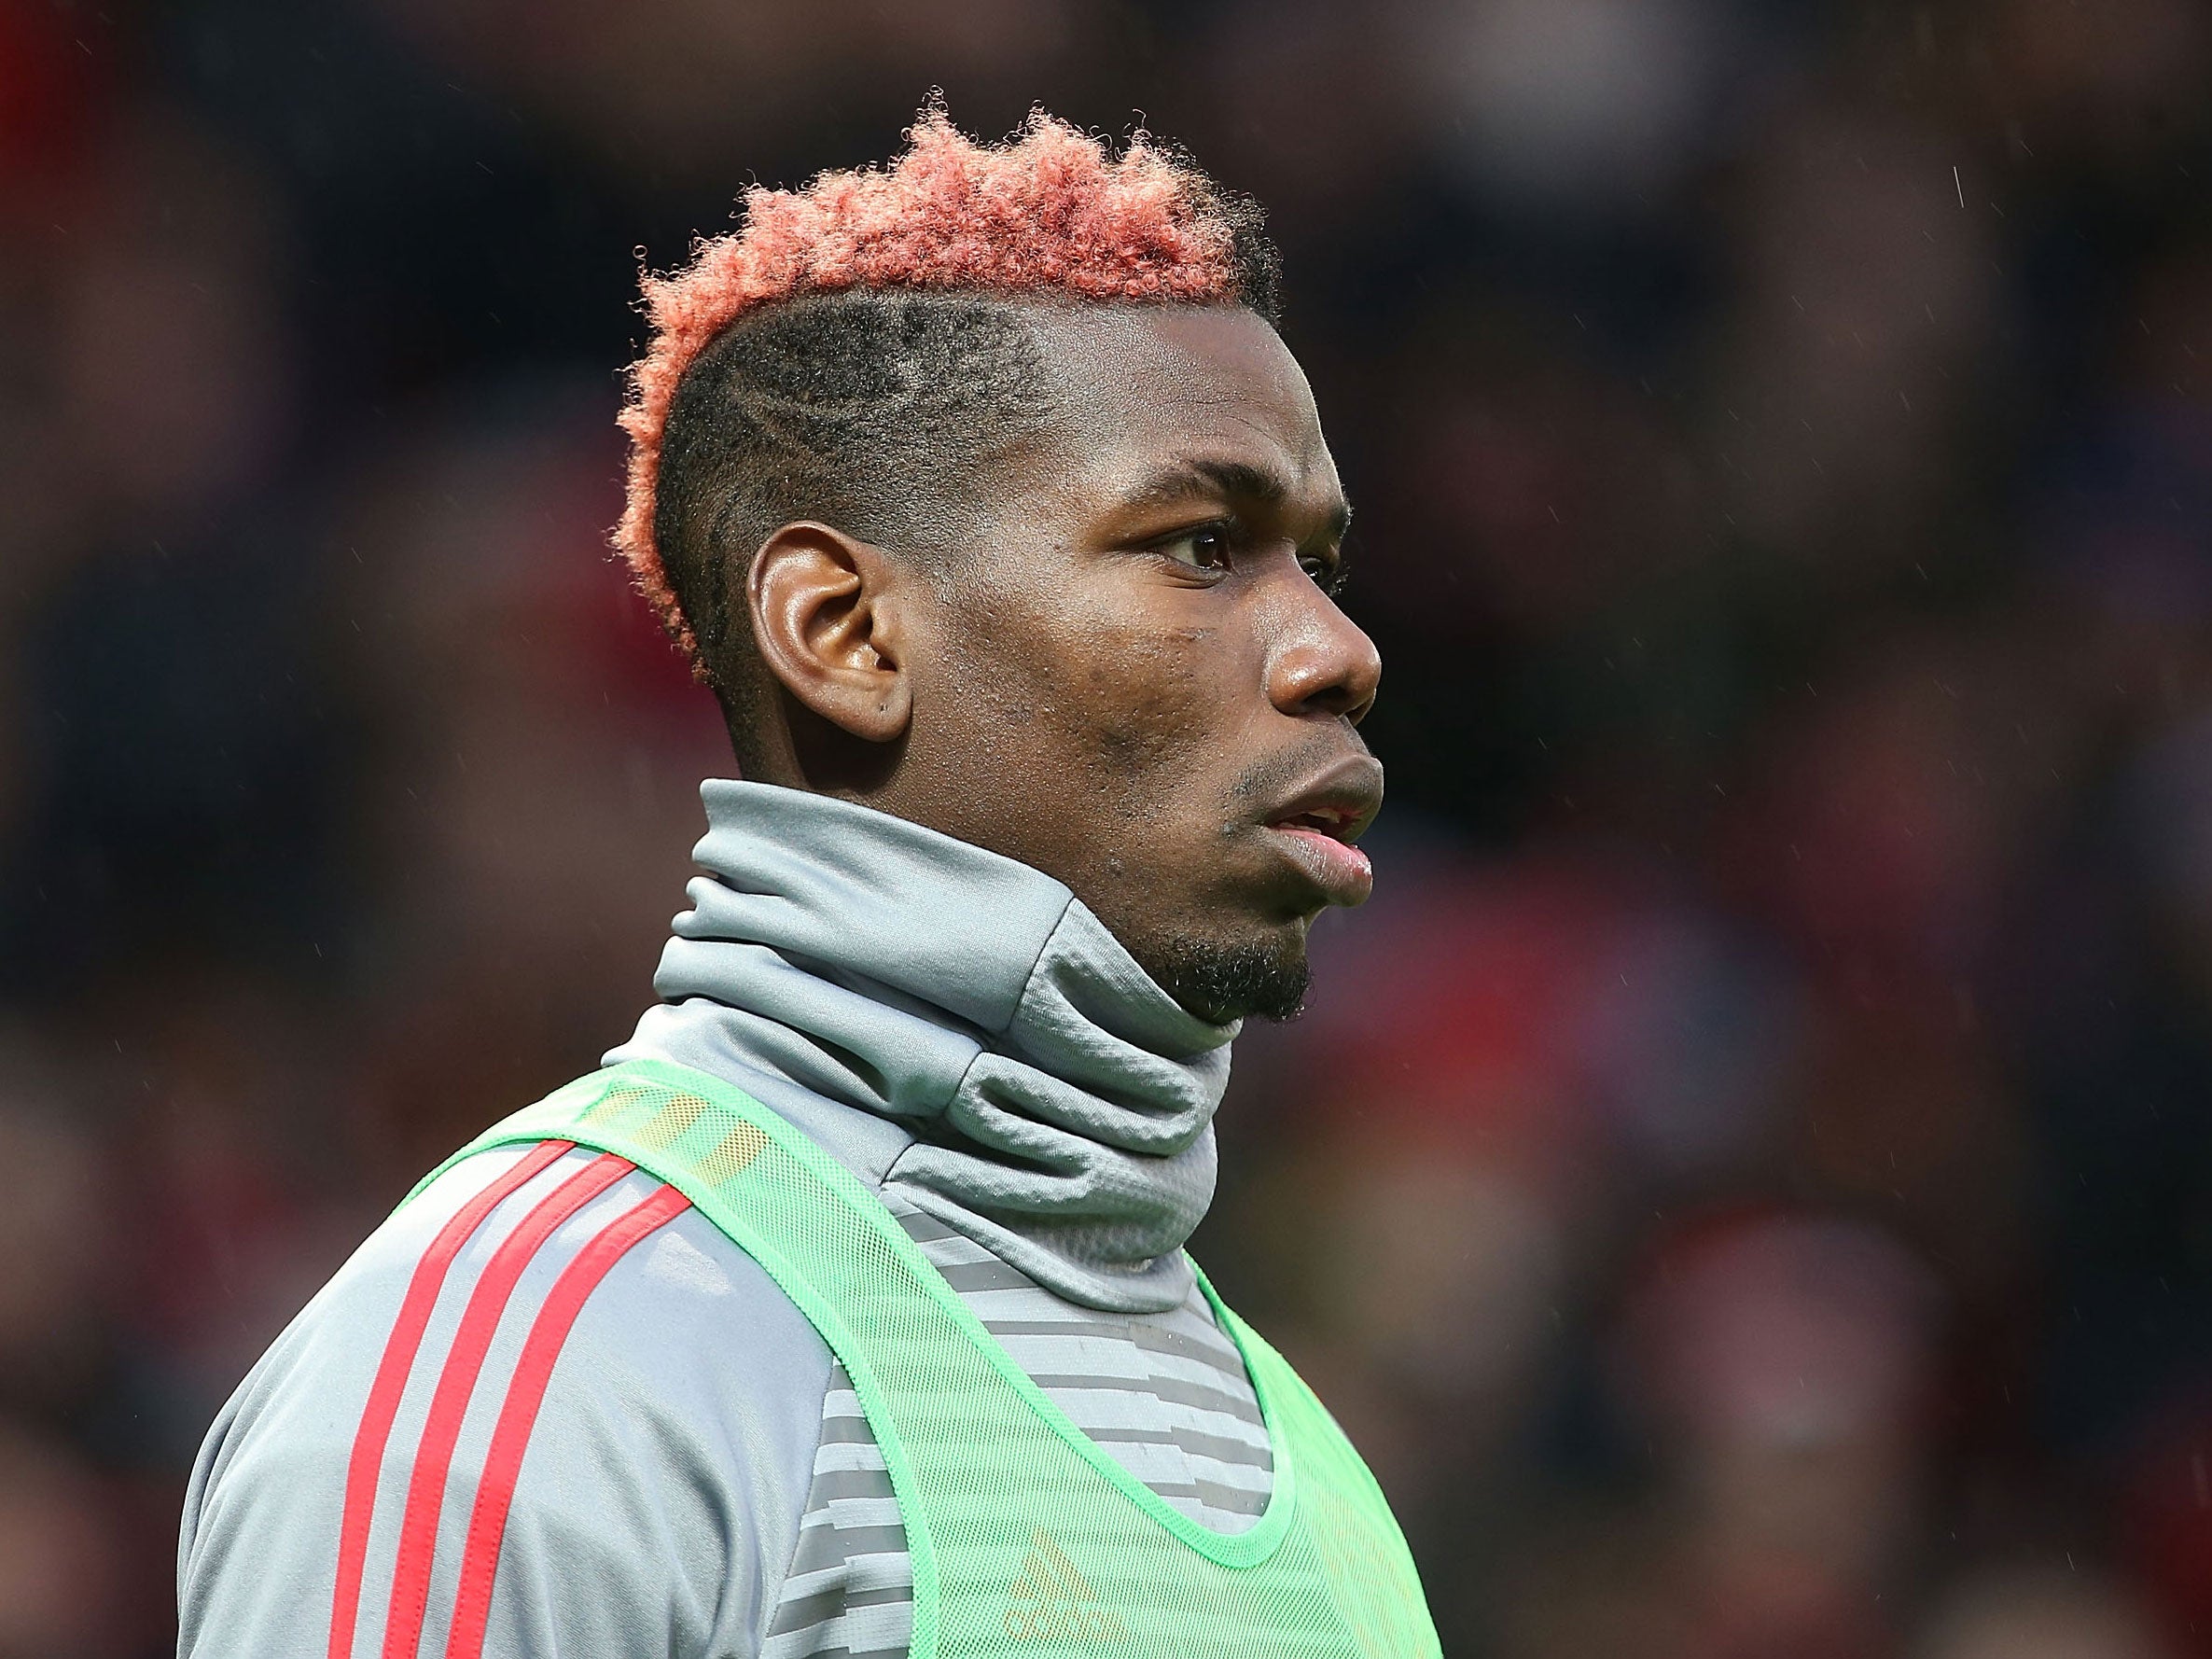 Pogba was benched against Huddersfield Town